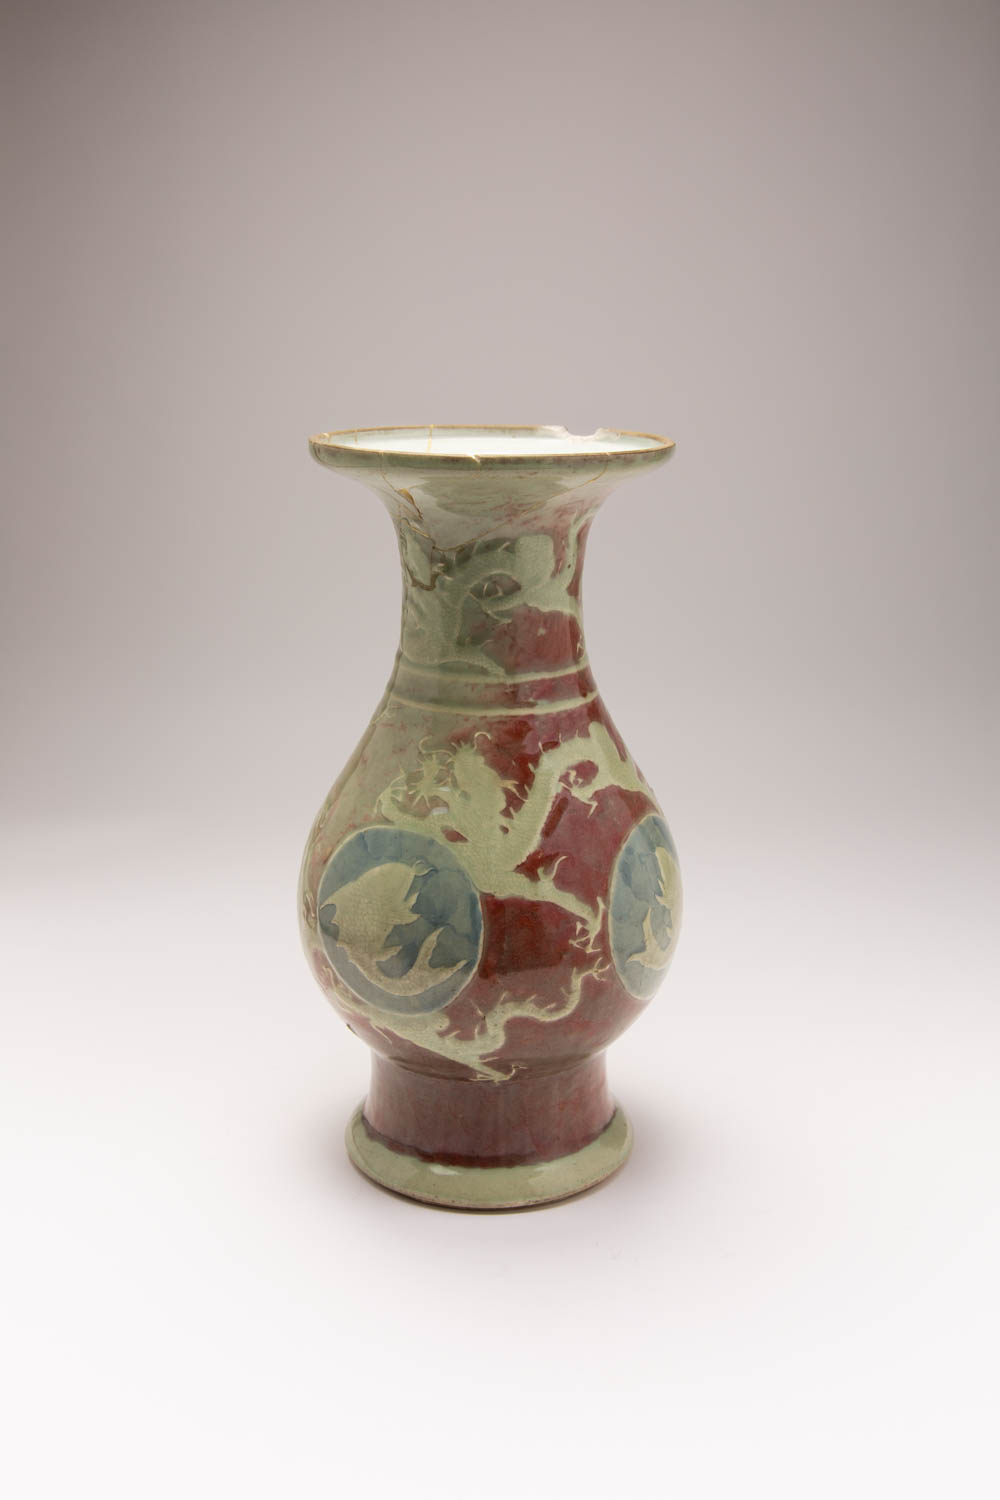 A CHINESE COPPER-RED GROUND, CELADON AND UNDERGLAZE BLUE BALUSTER VASE 18TH CENTURY The body